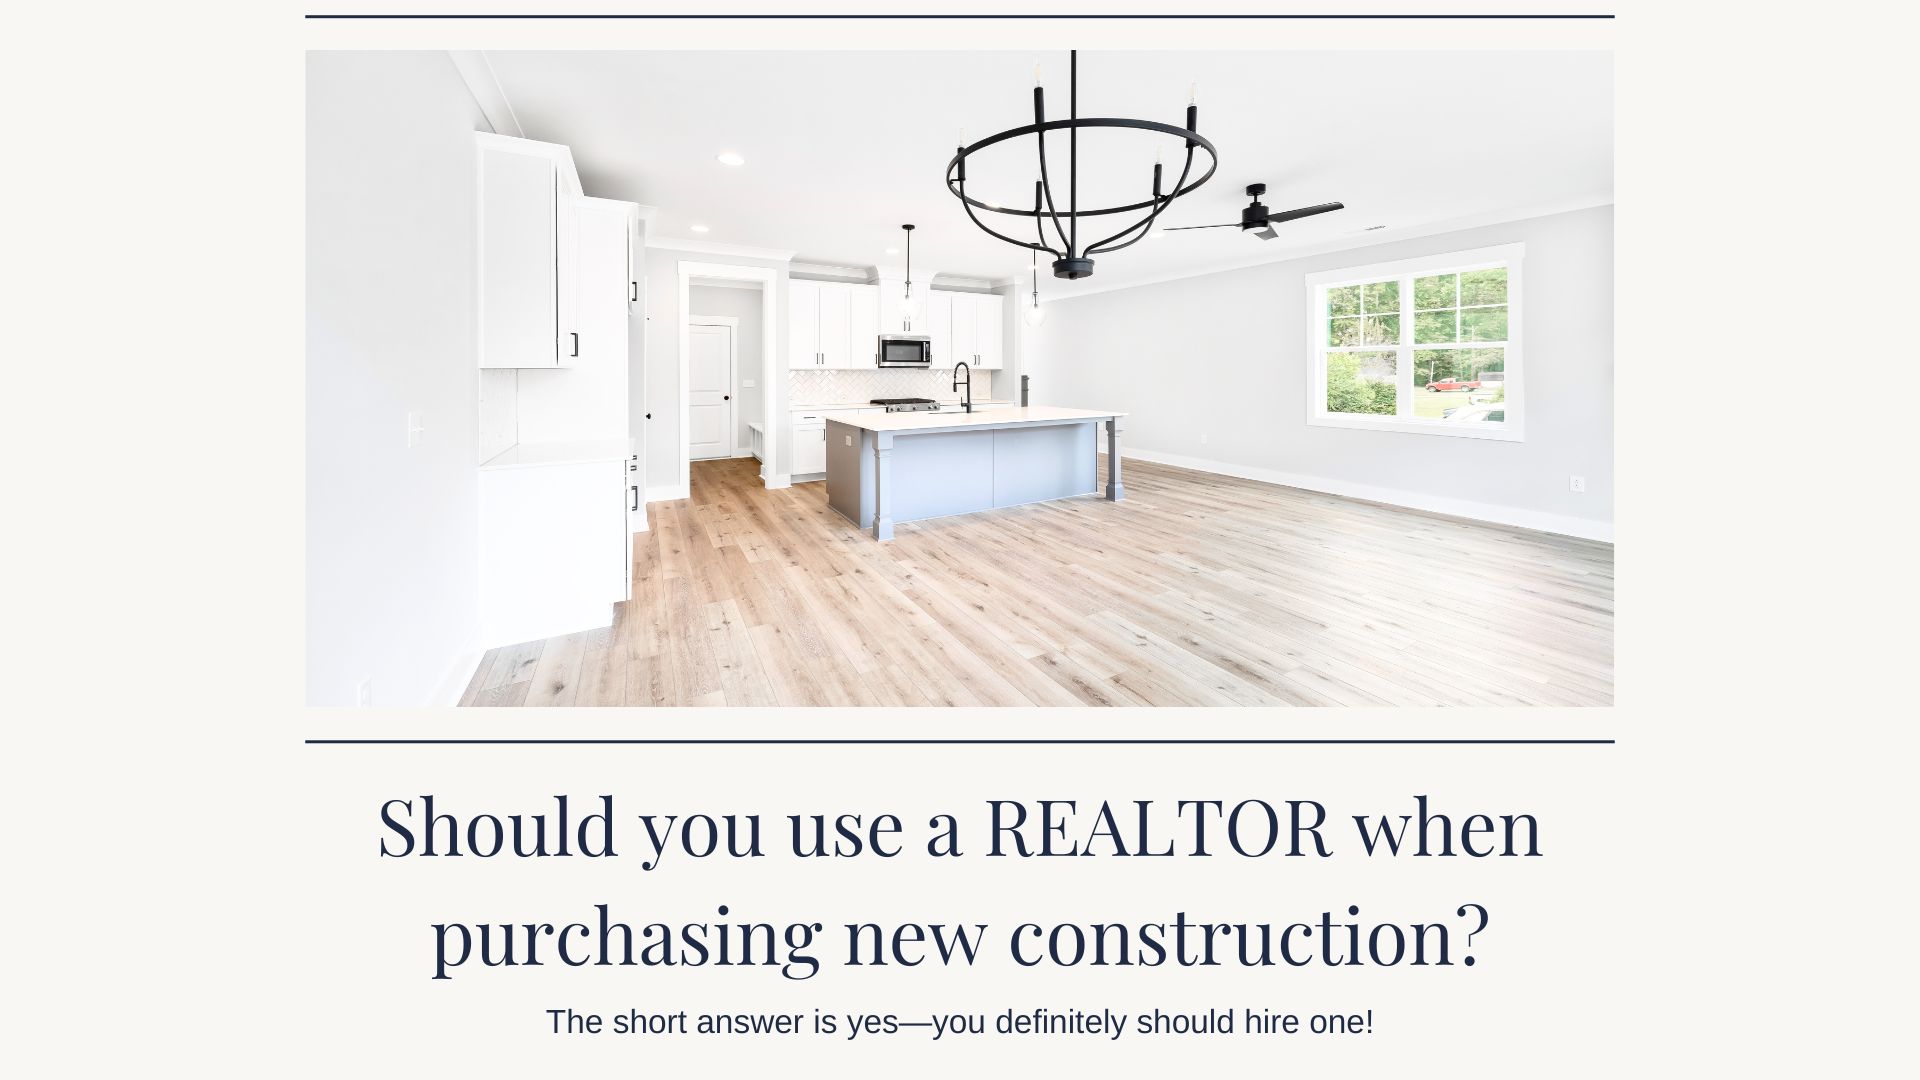 Should you use a REALTOR to purchase new construction home